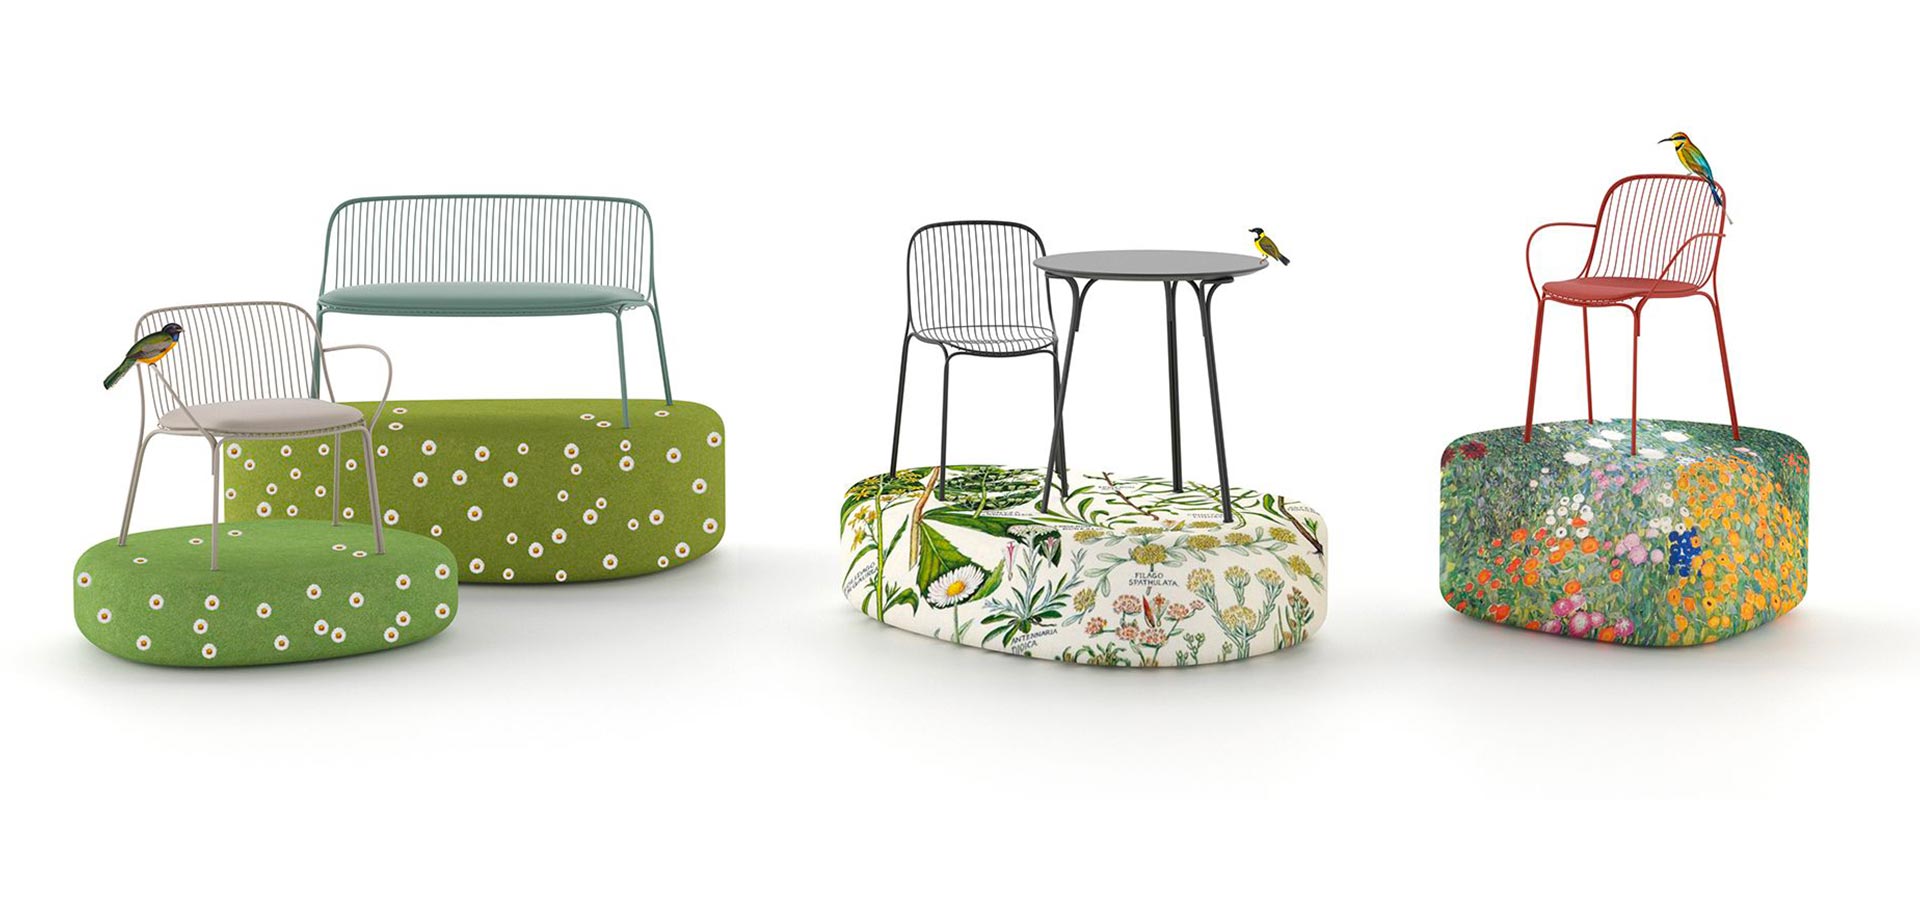 HiRay Kartell collection